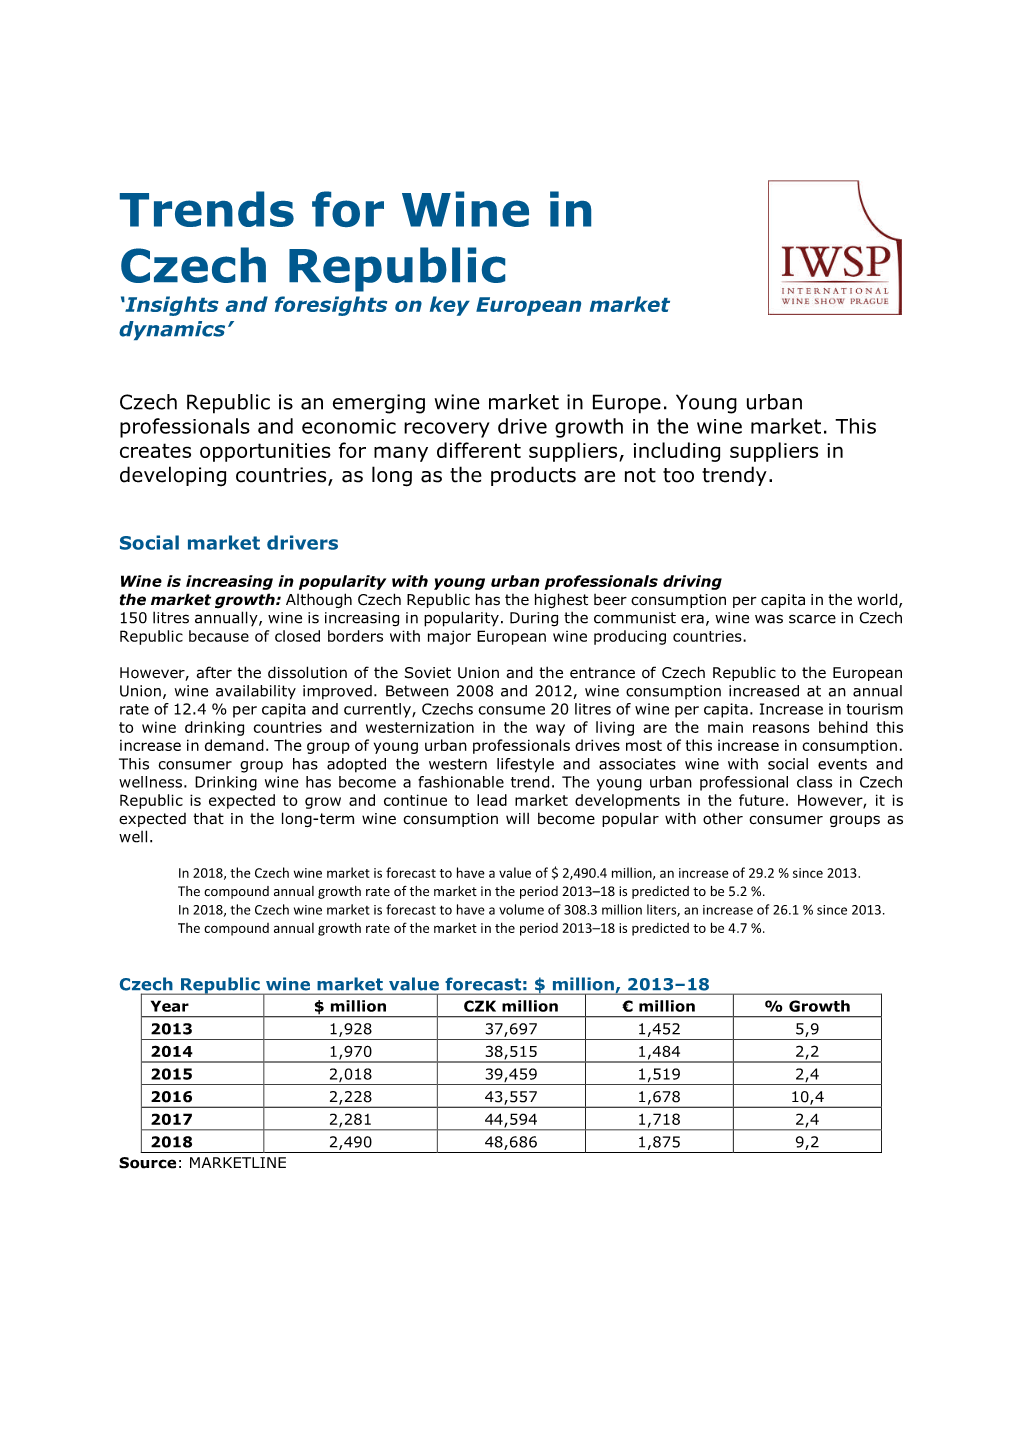 Trends for Wine in Czech Republic ‘Insights and Foresights on Key European Market Dynamics’